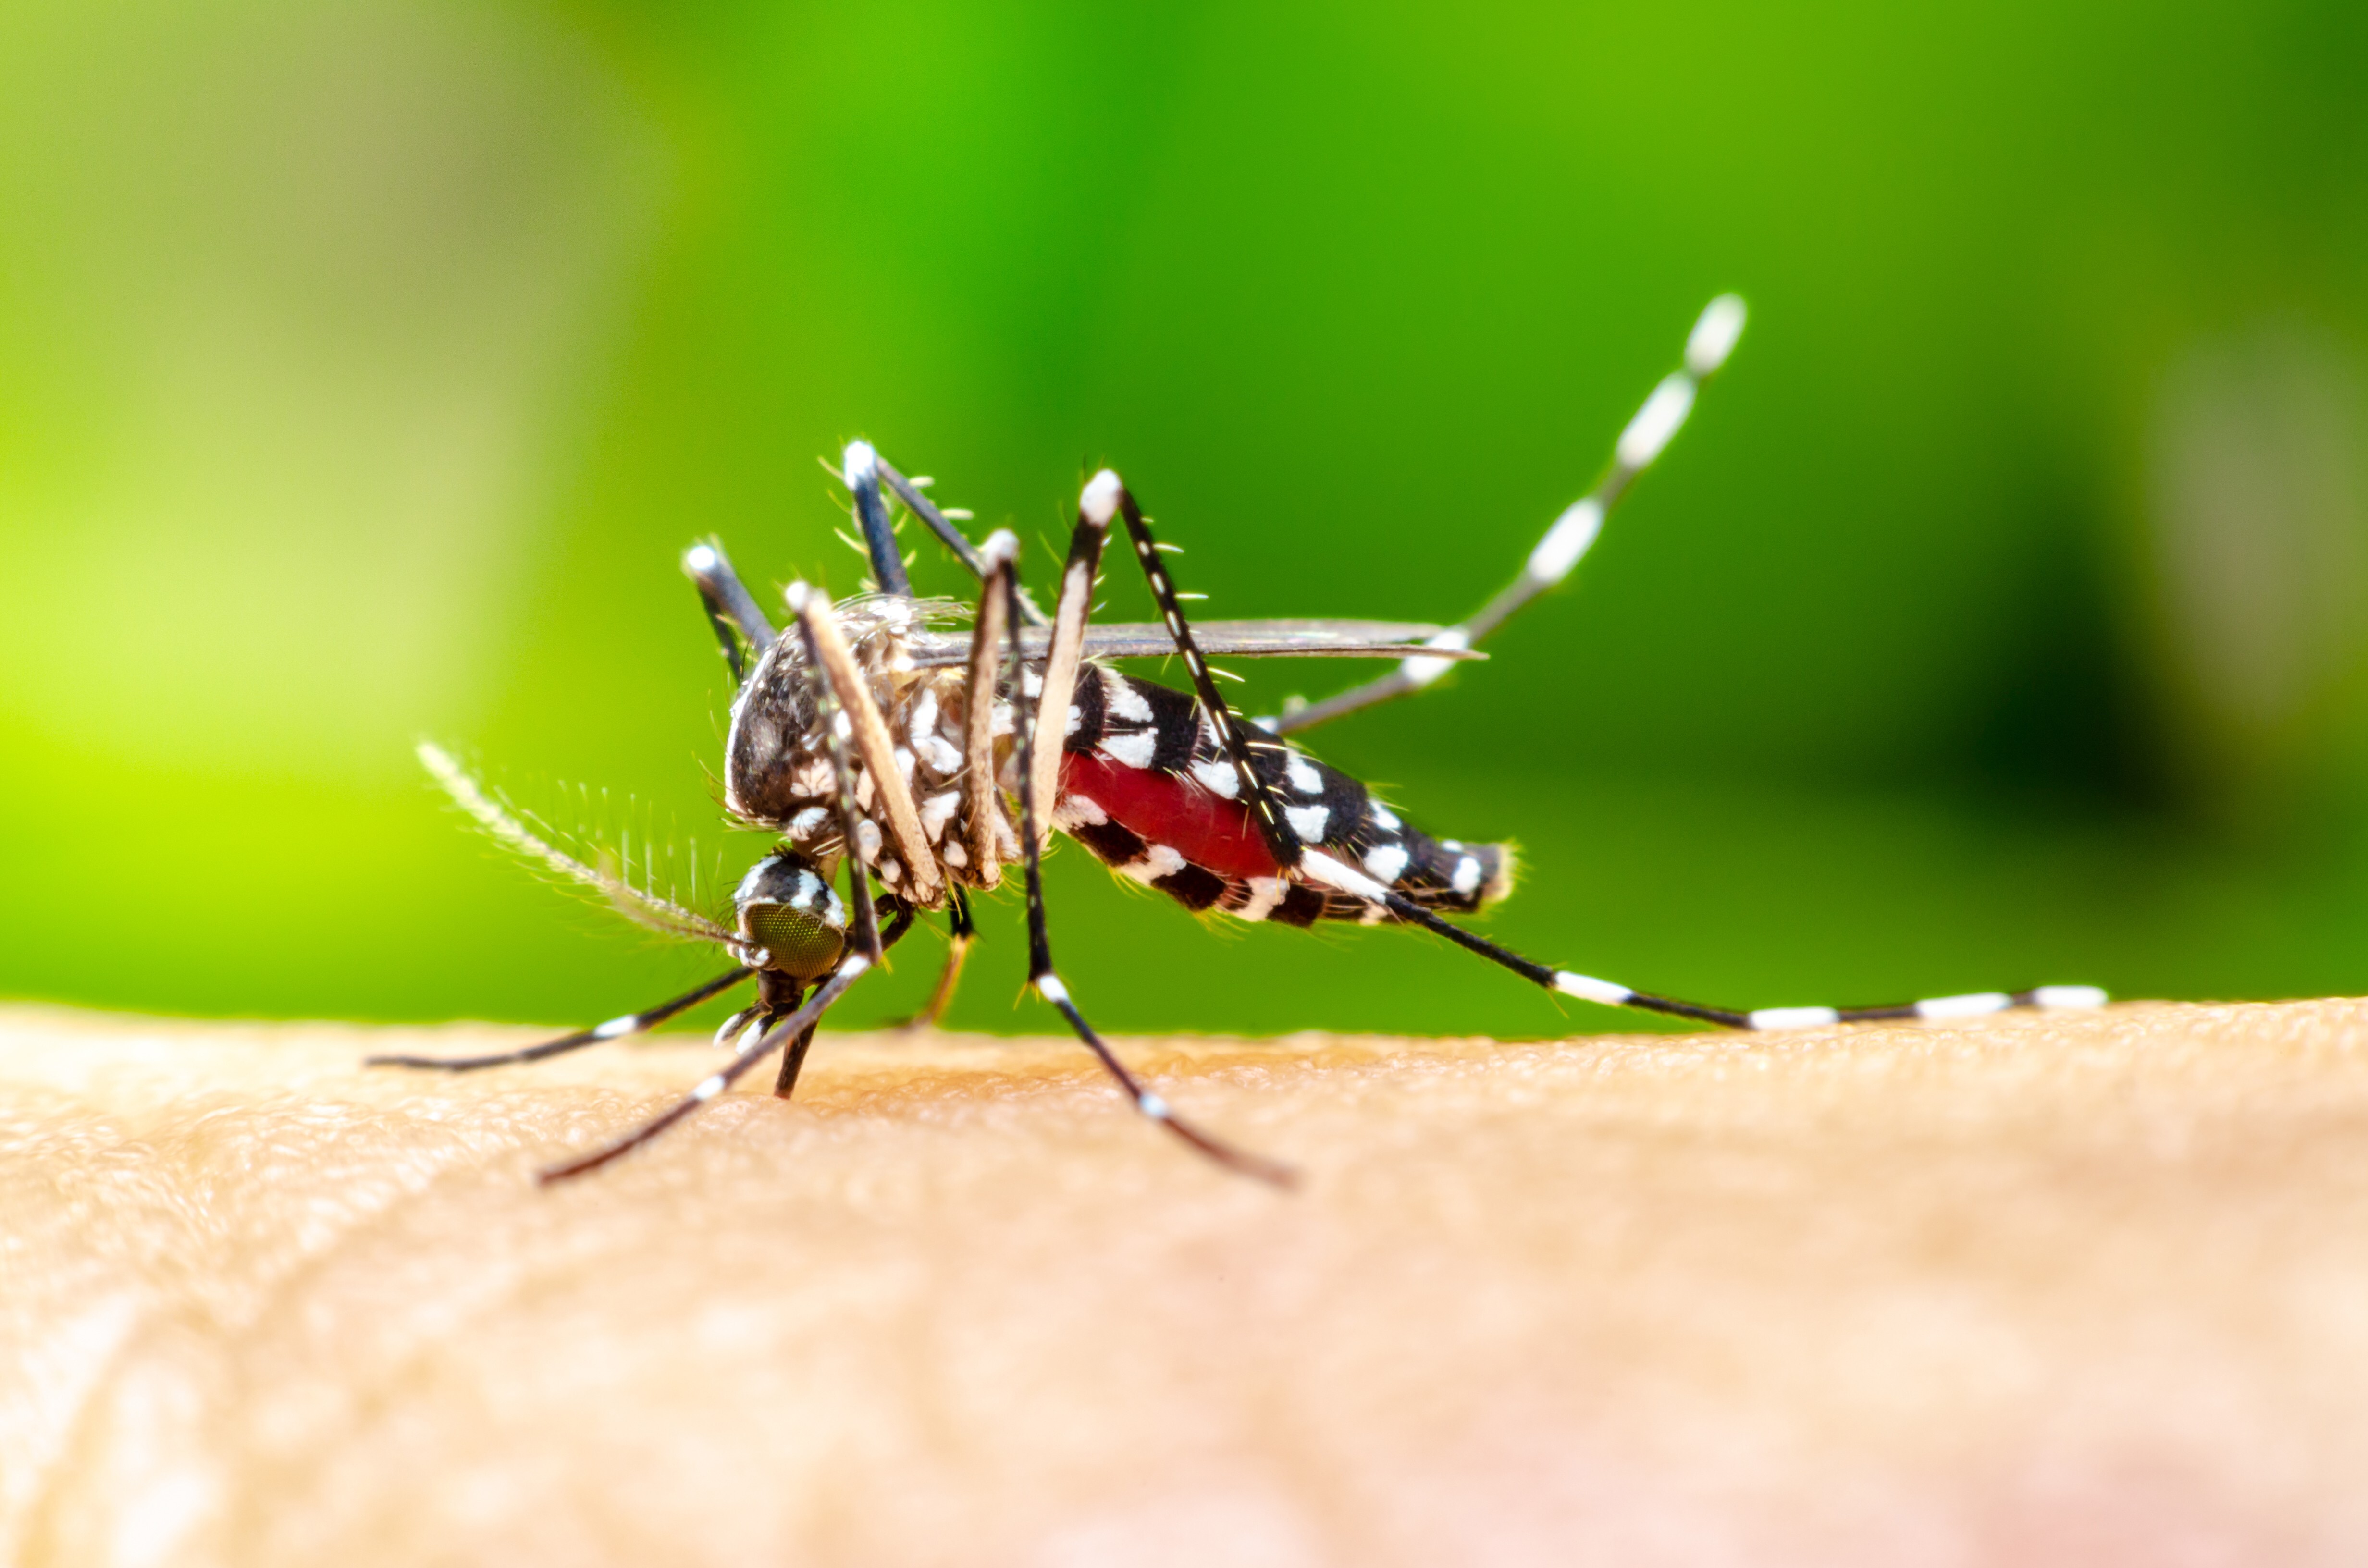 China has become the 40th country to be certified malaria-free by the World Health Organization. Photo: Shutterstock